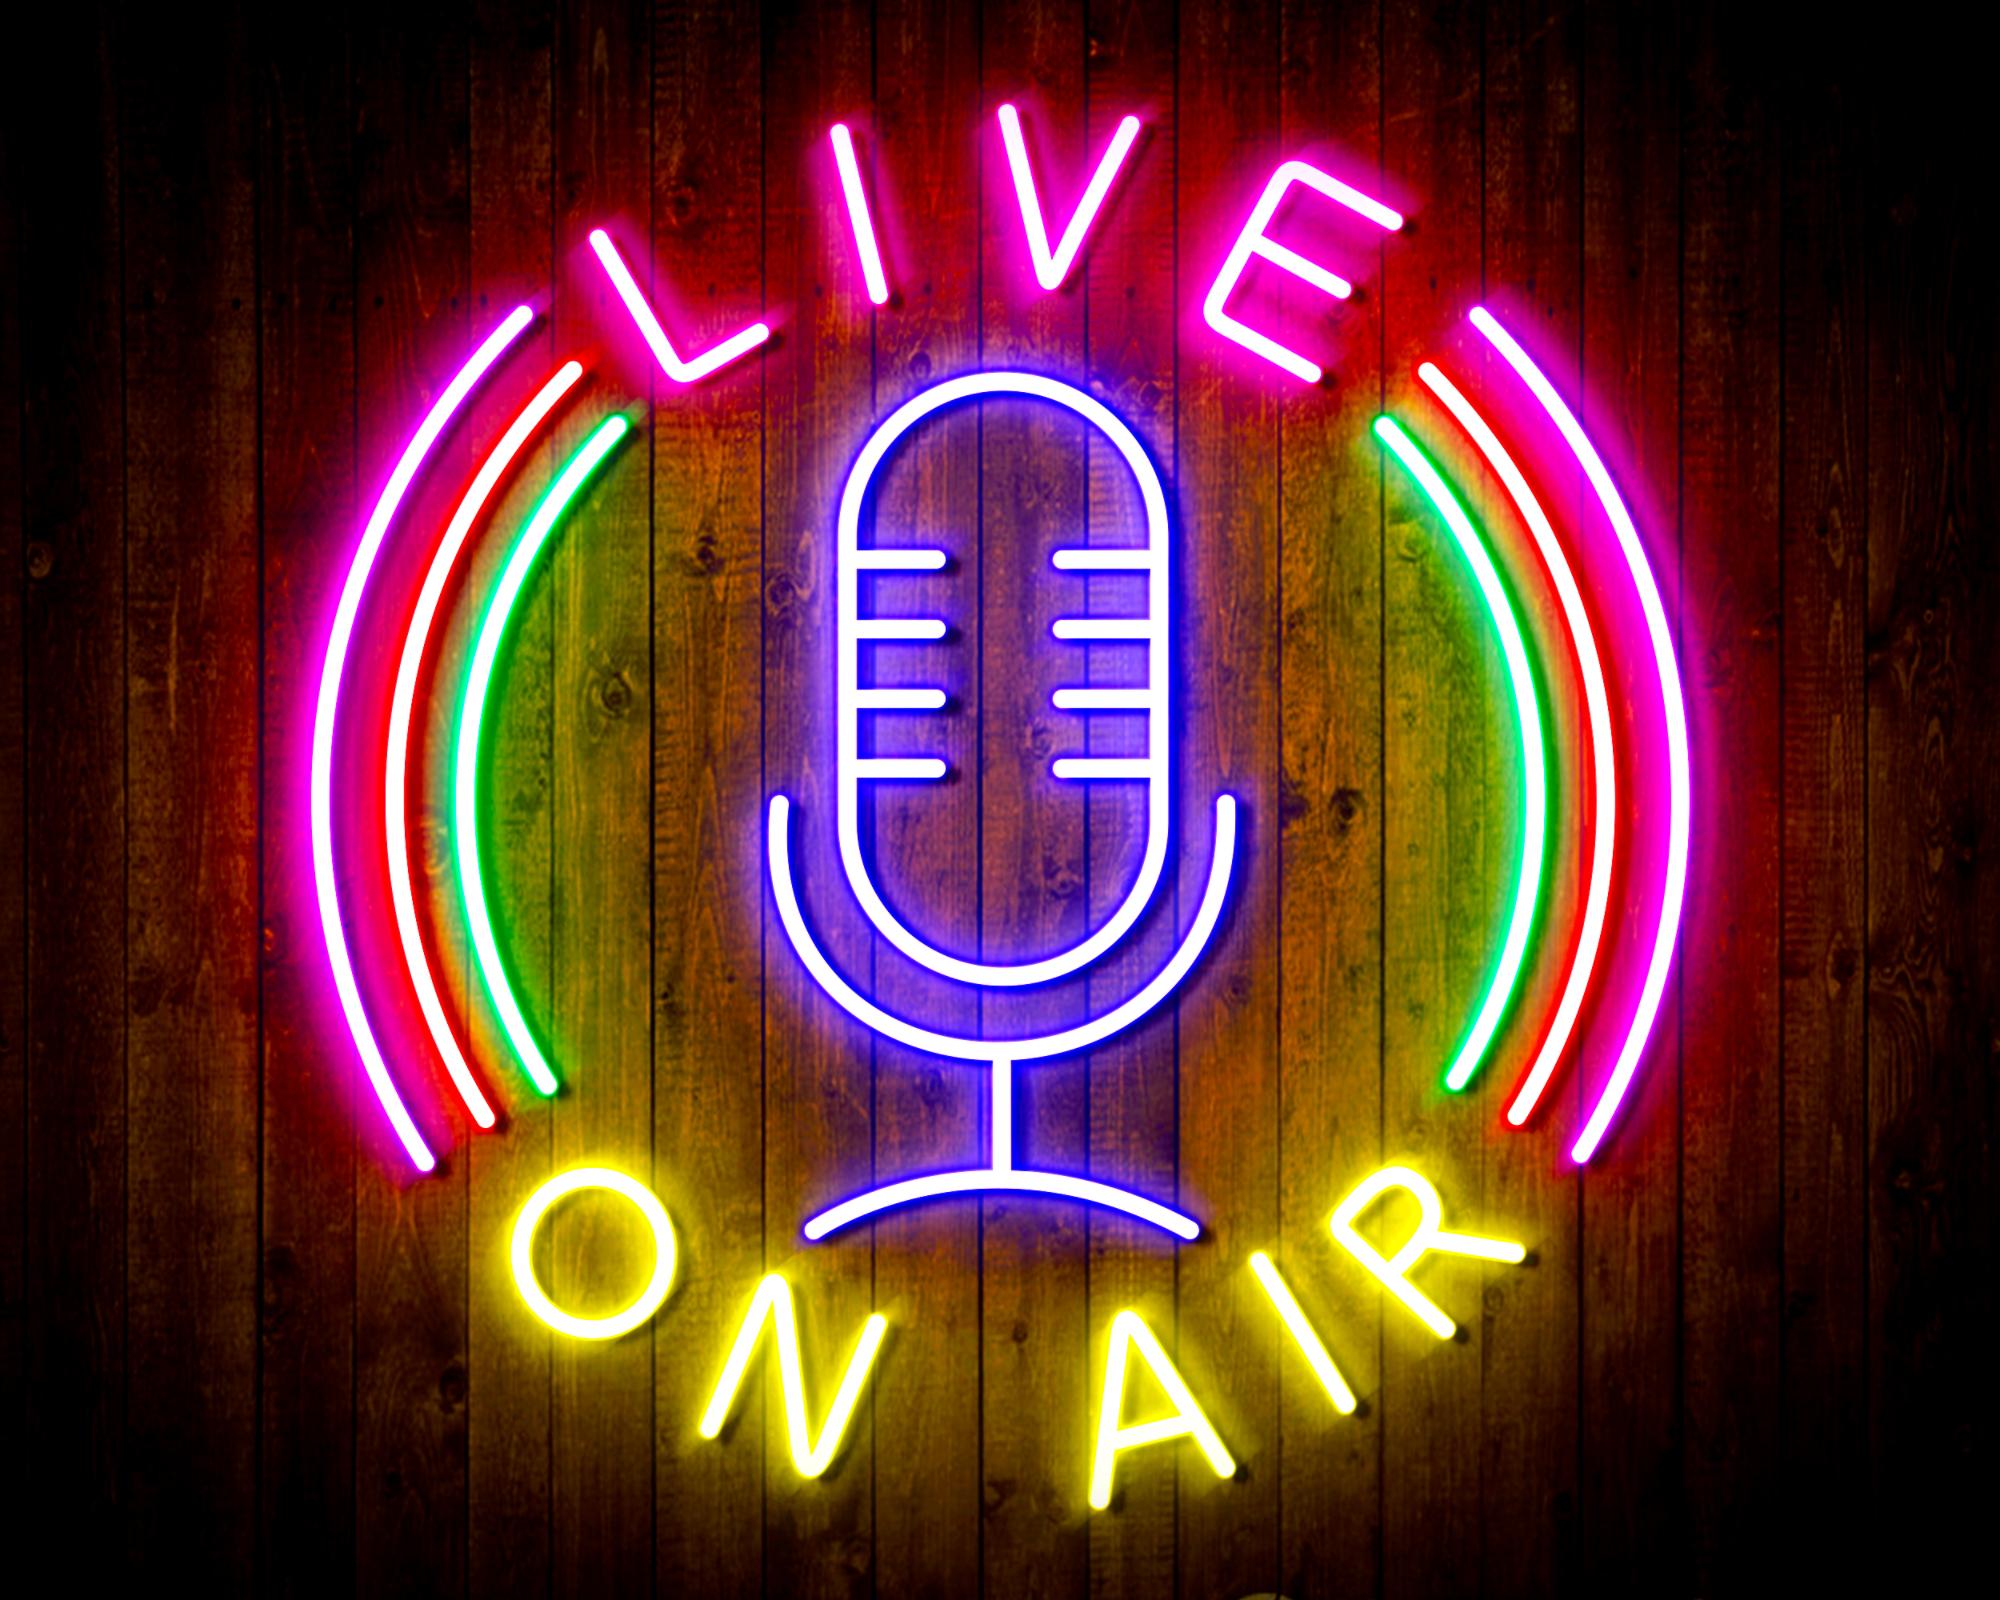 Live On Air LED Neon Sign Wall Light